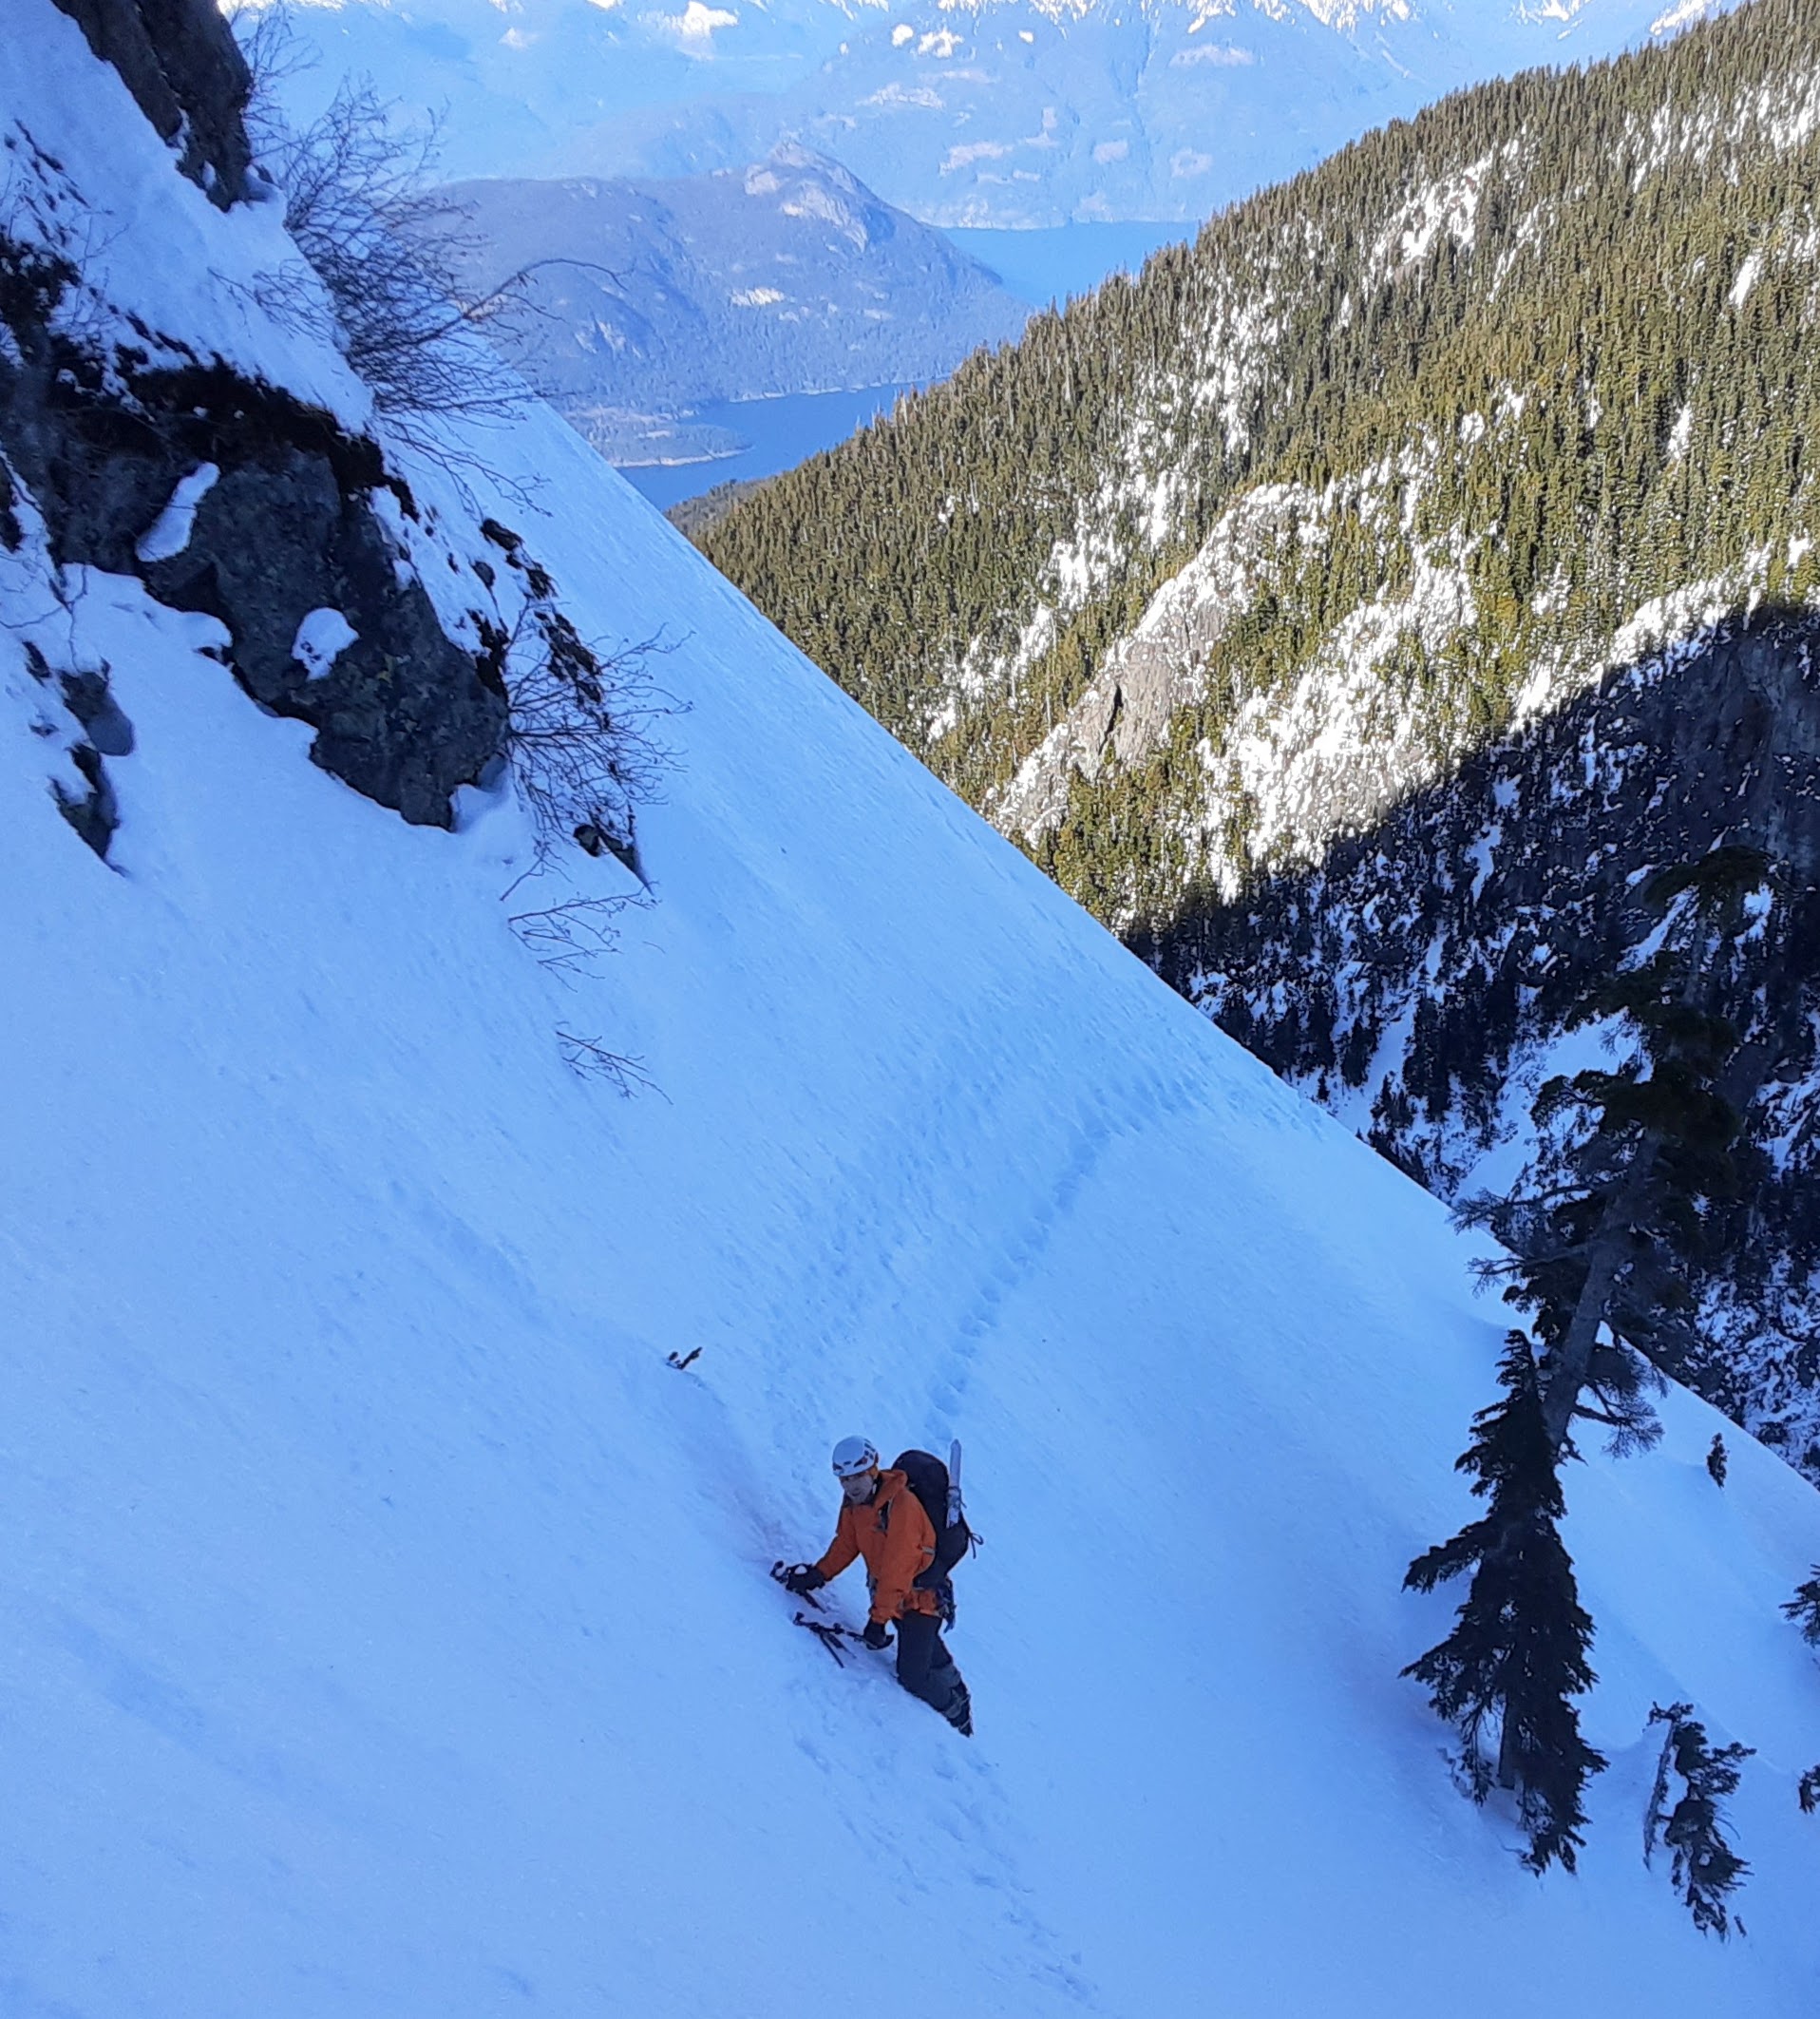 The traverse was also in great shape. PC: Thomas Morrissey.